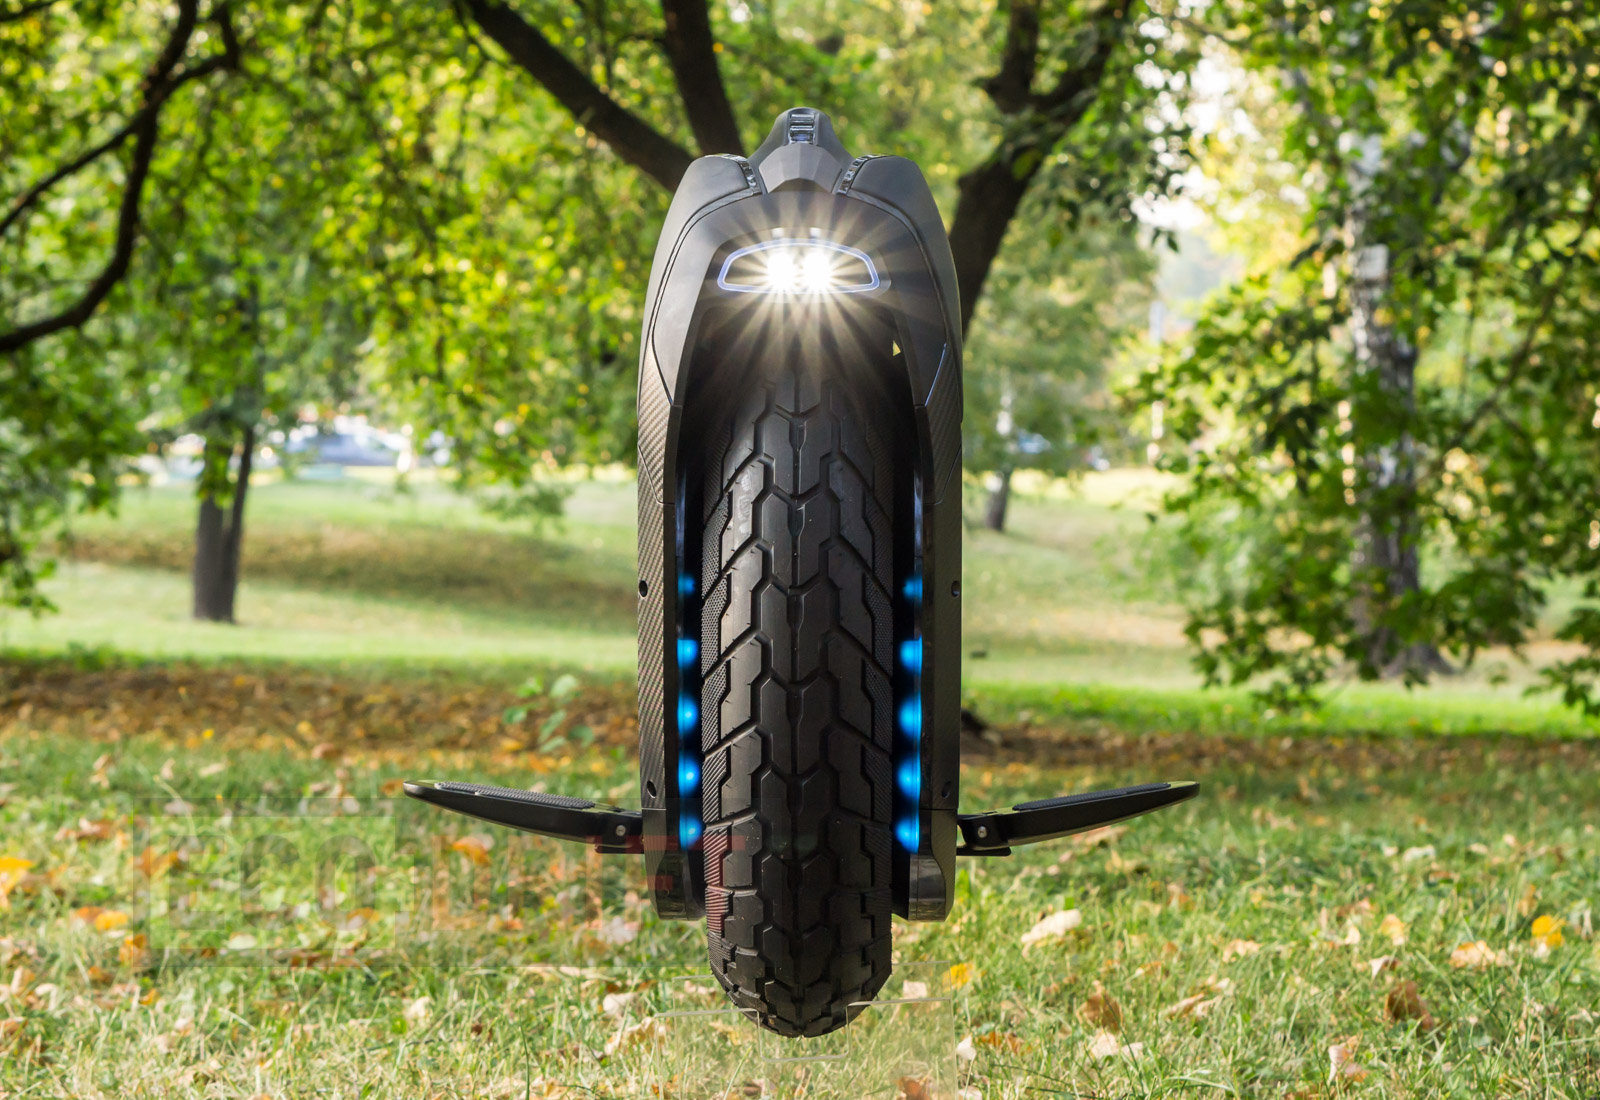 Моноколесо Ninebot by Segway One Z10 995Wh 2019